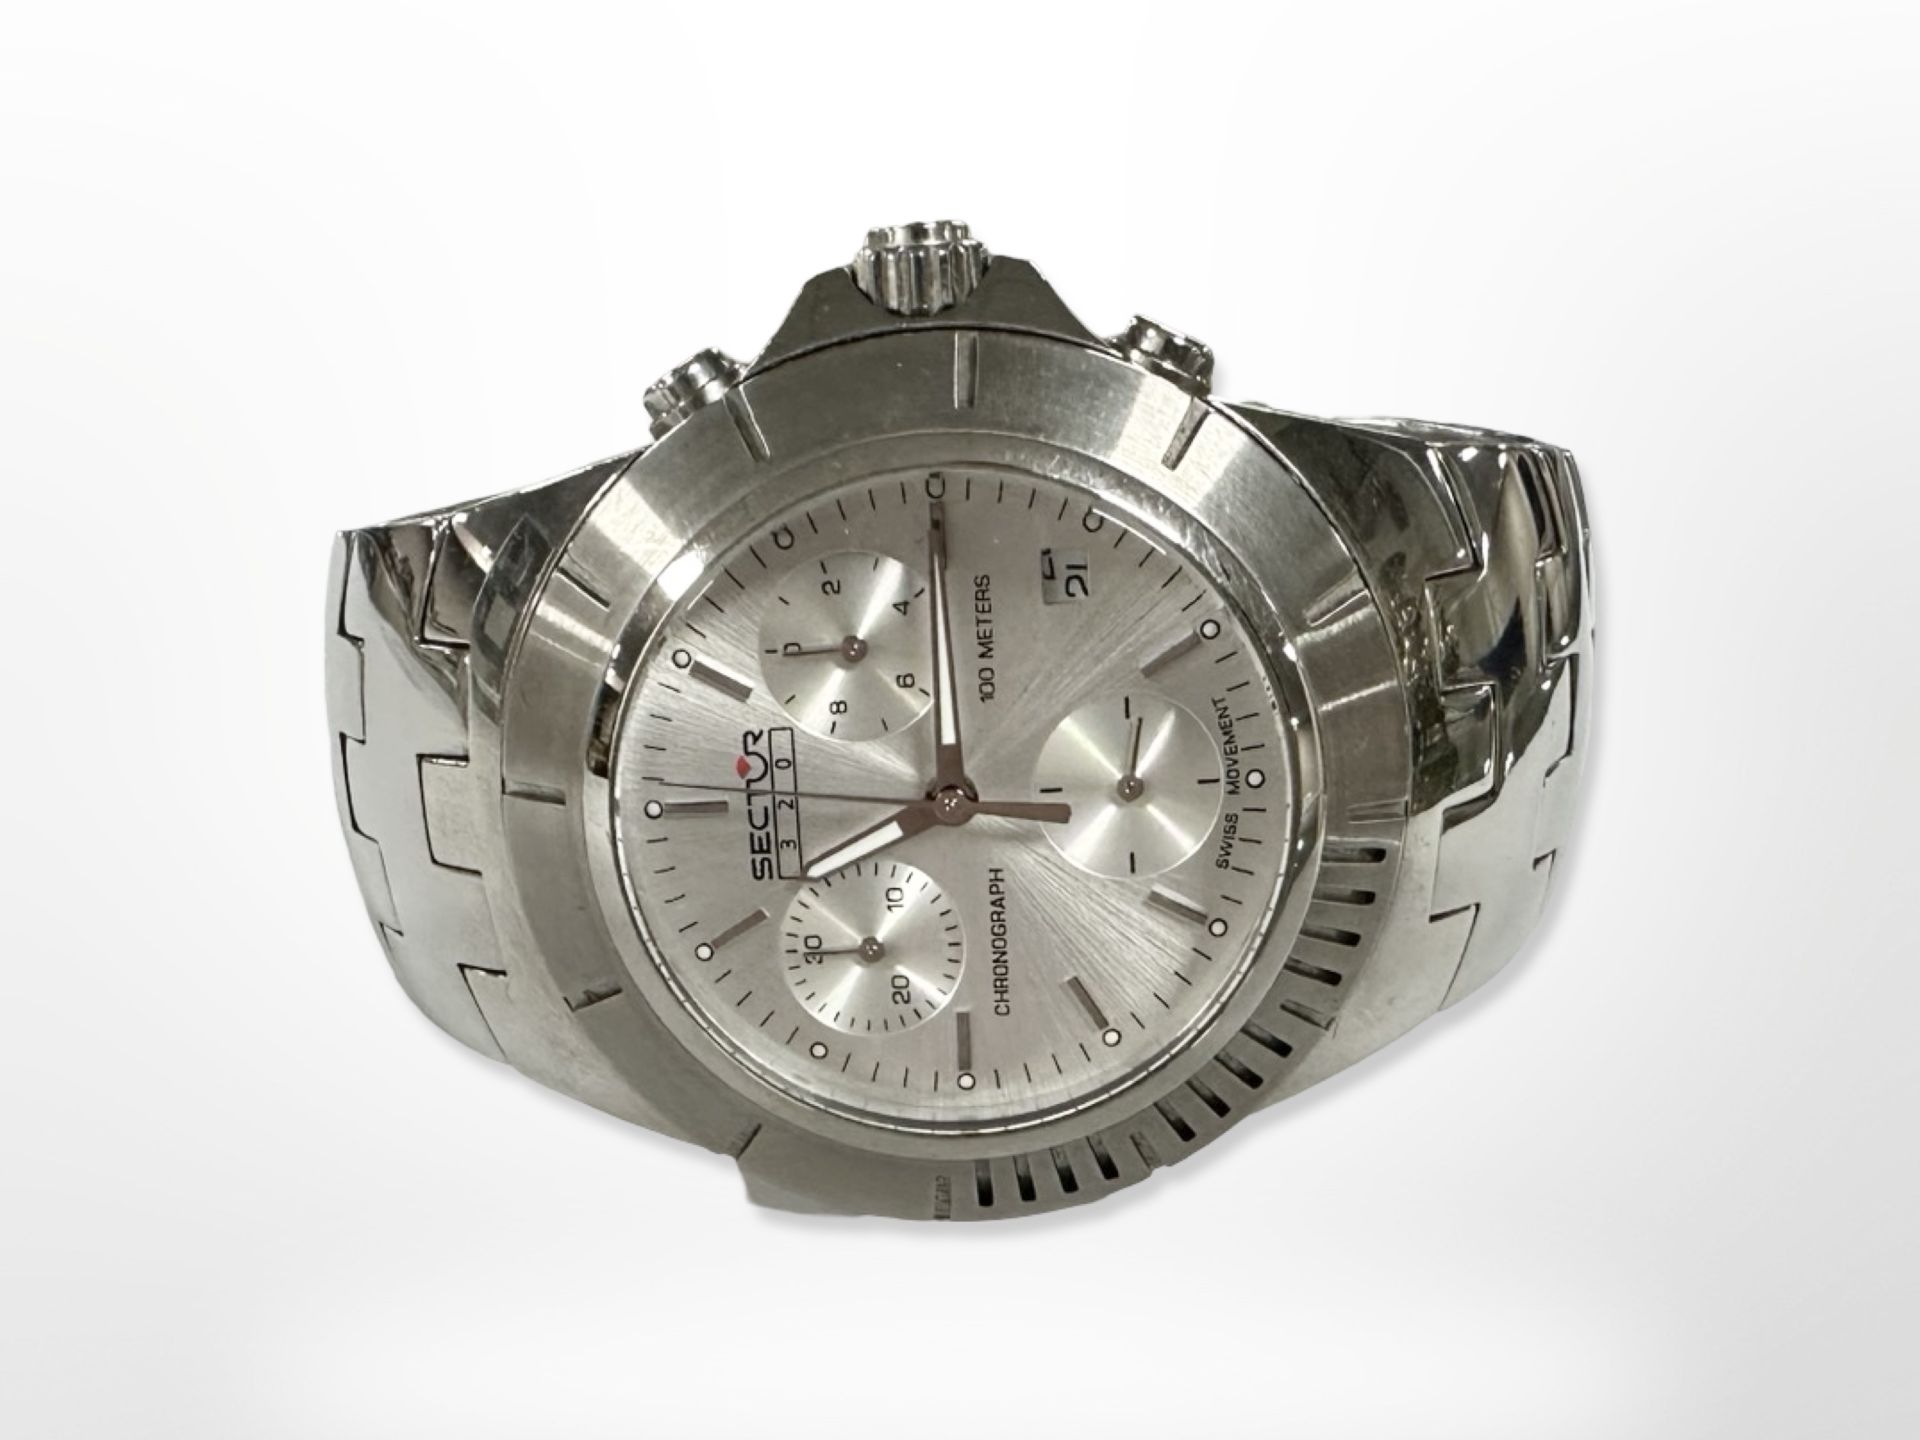 A Gent's stainless steel Sector wristwatch